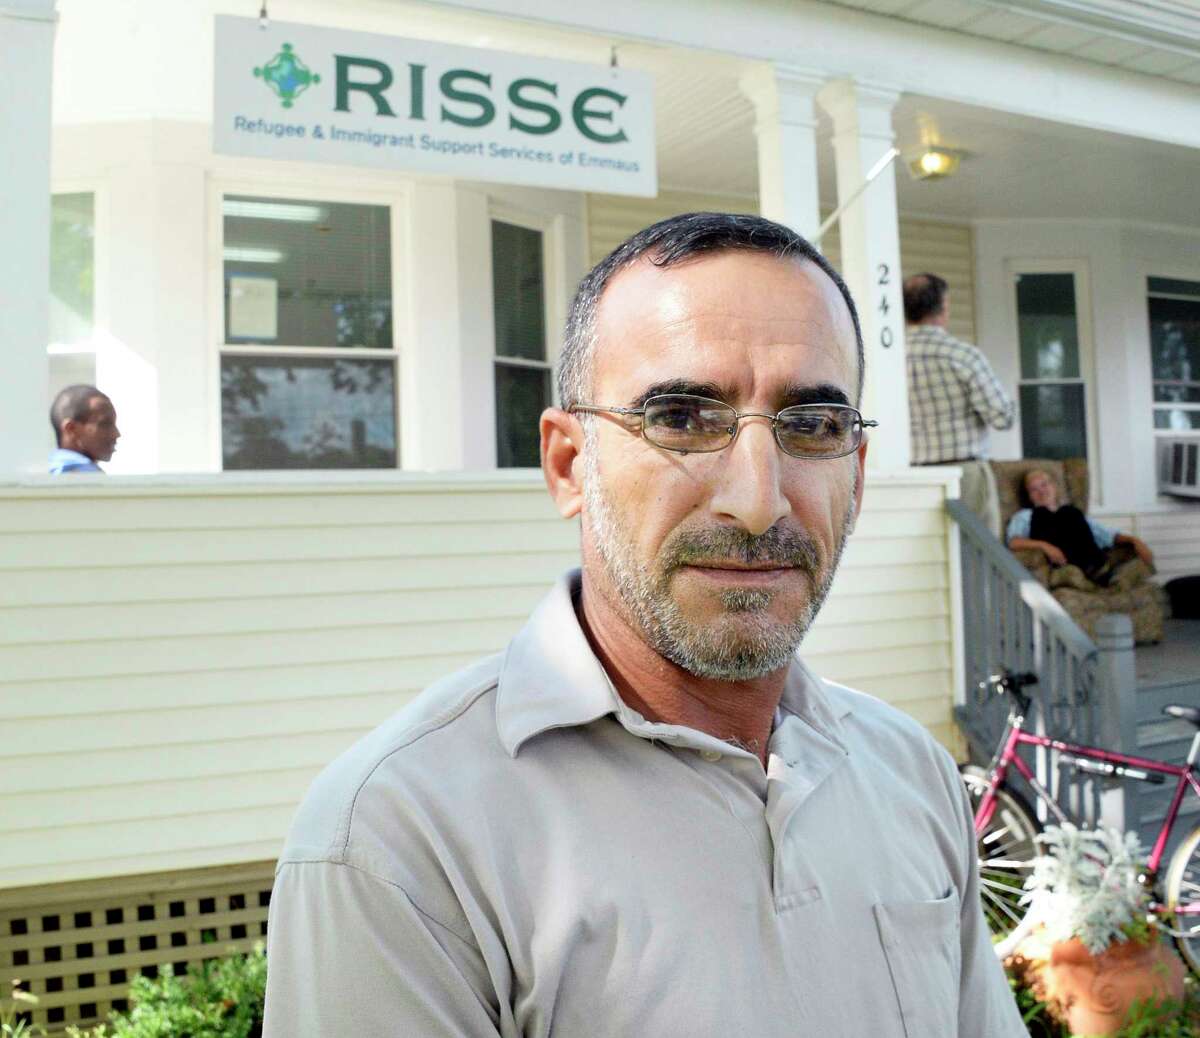 Syrian refugee Ibrahim Alkahraman discusses his worries over his three sons still in Jordan during an interview at the RISSE outreach center in the Pine Hills neighborhood Tuesday Sept. 18, 2018 in Albany, NY. (John Carl D'Annibale/Times Union)